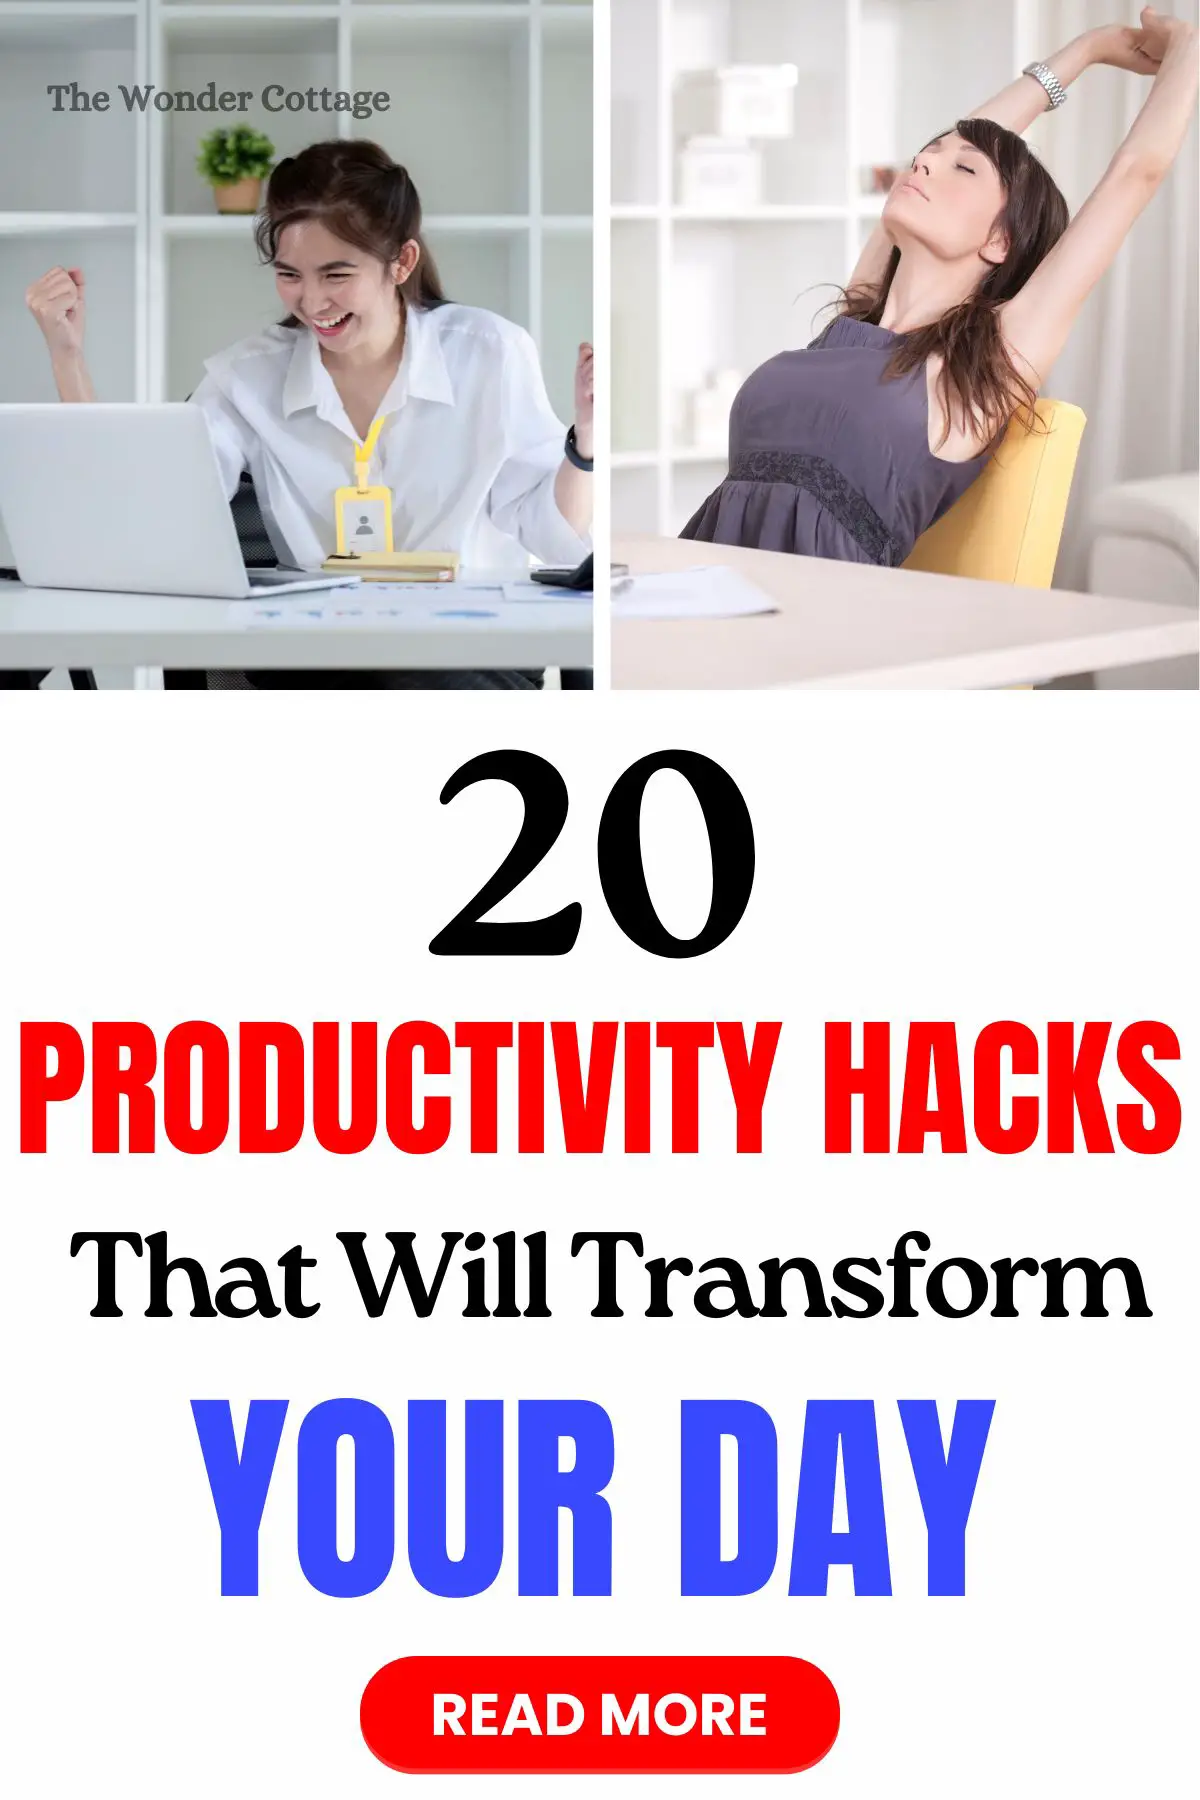  Productivity Hacks That Will Transform Your Day